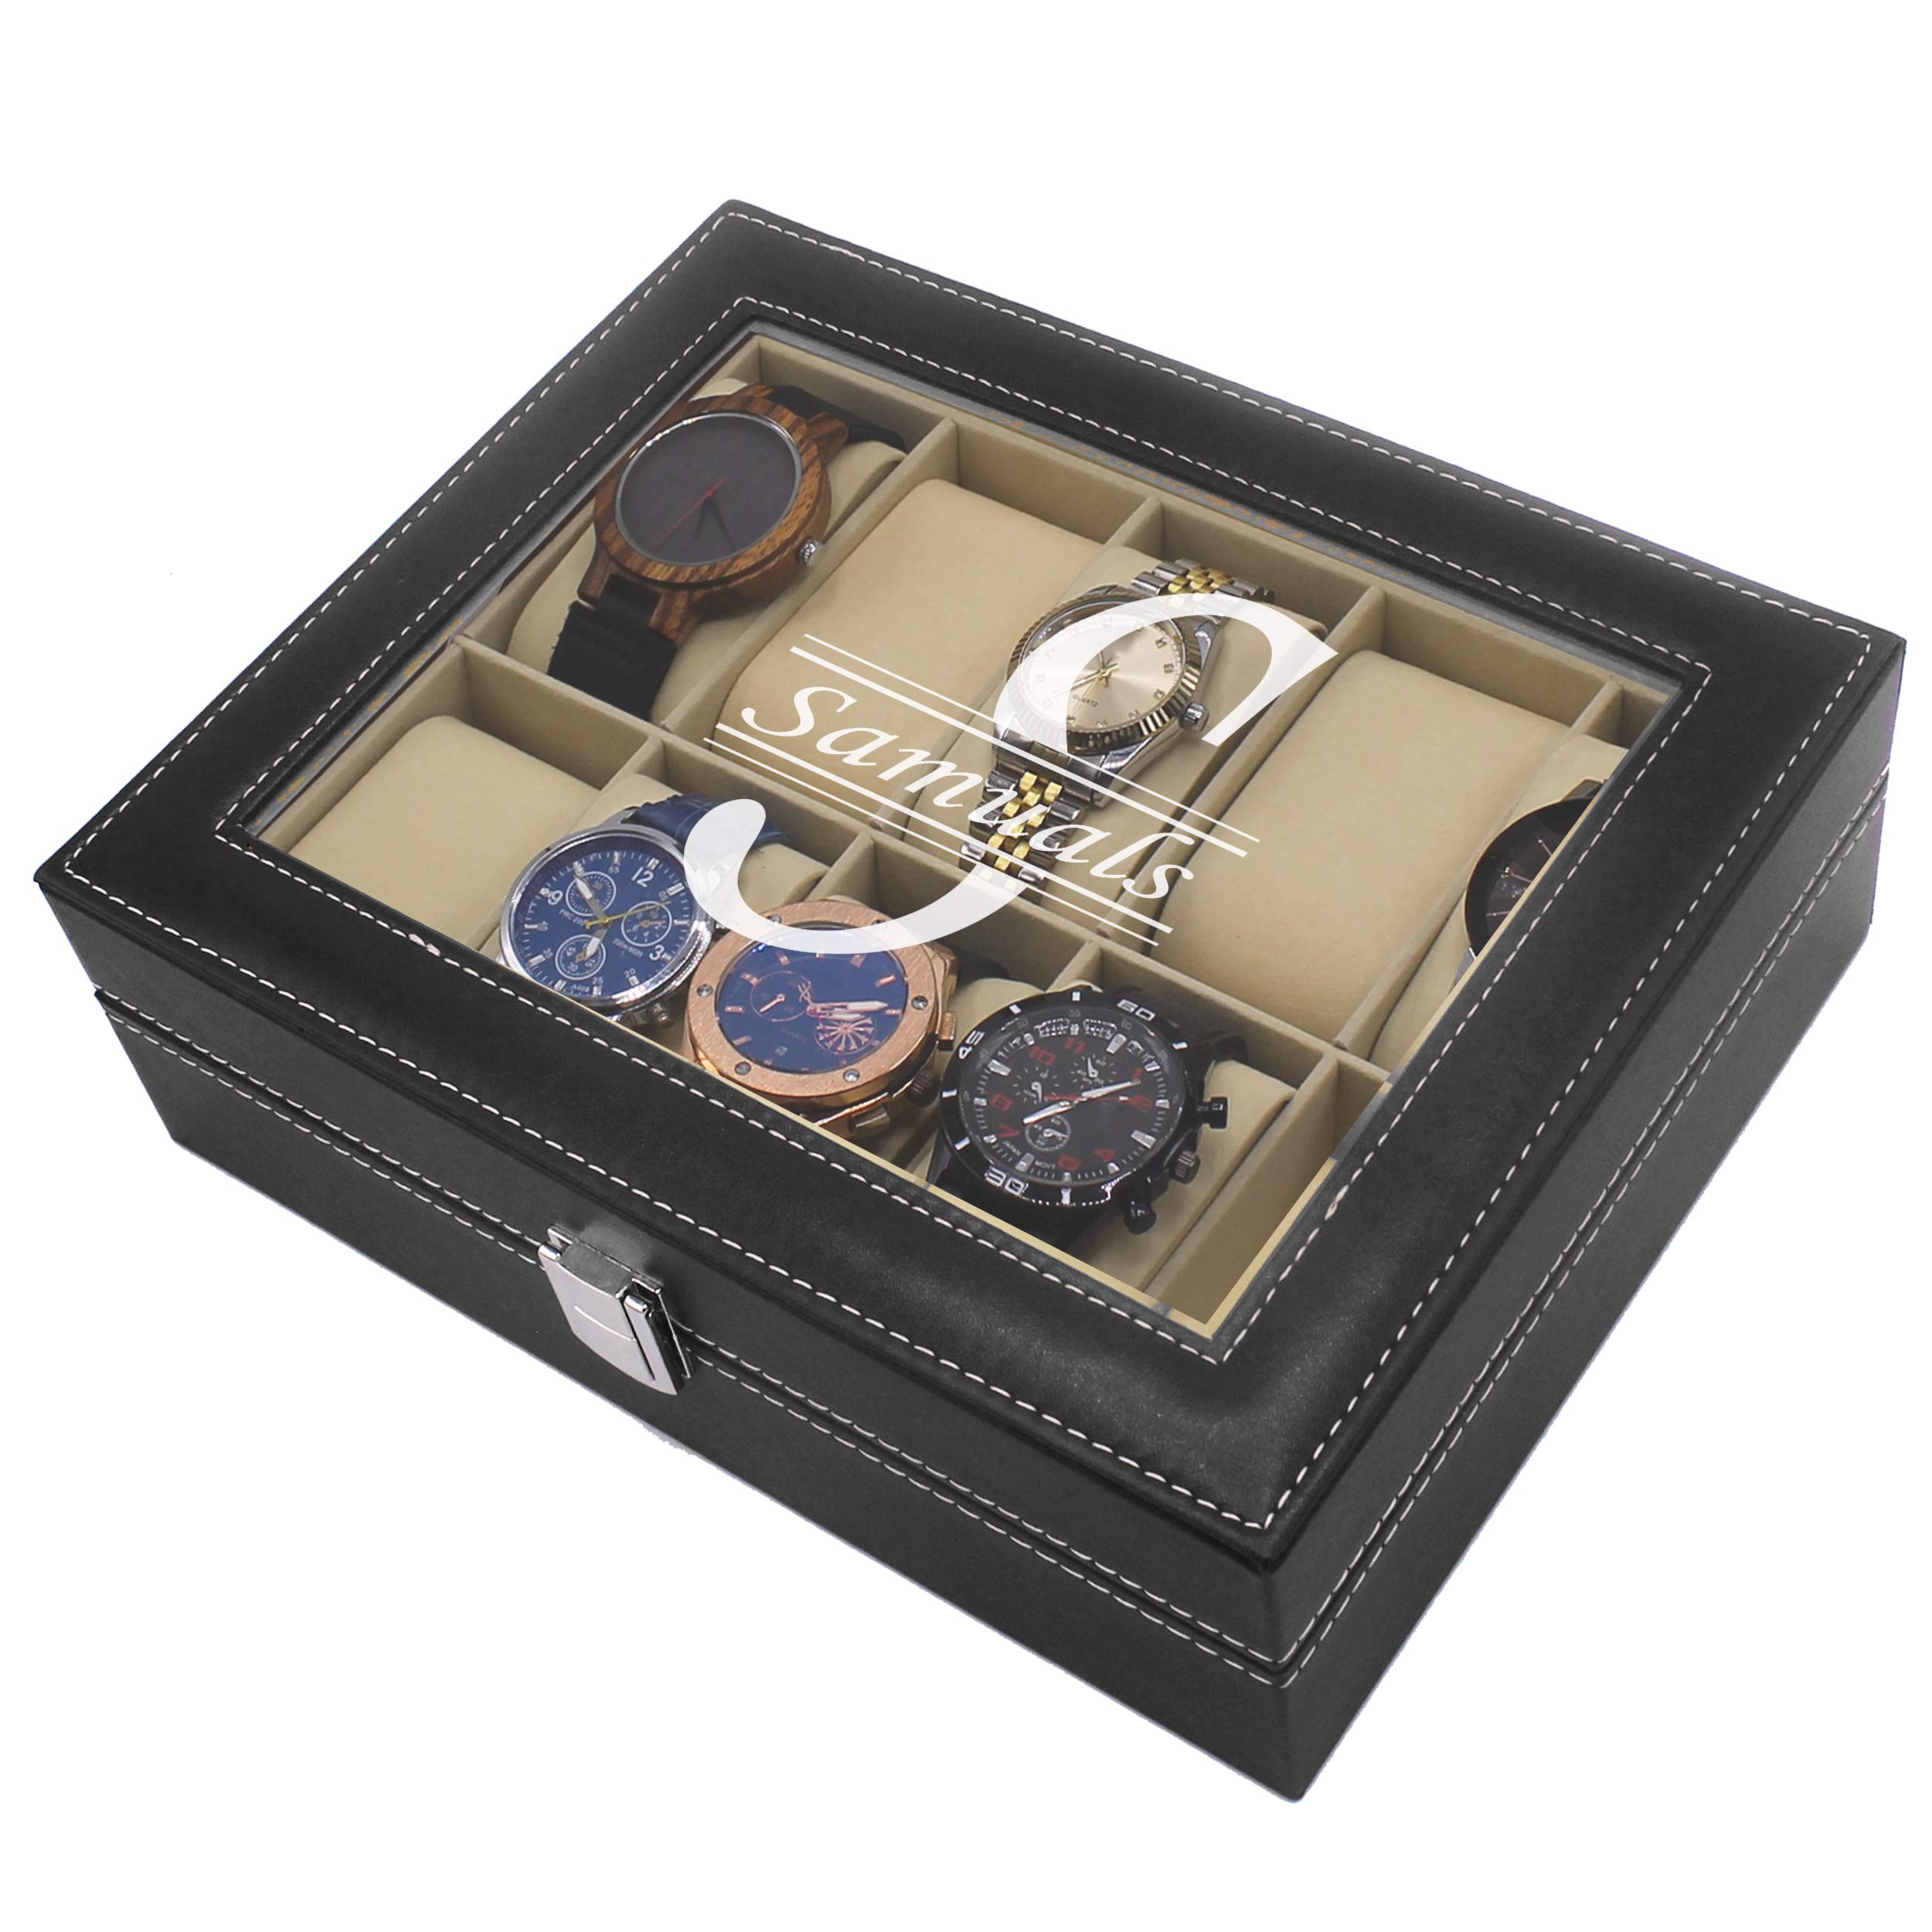 My Personal Memories, Custom Personalized Watch Storage Box Case - Name Initial - Groomsmen Fathers Day Gift - Engraved (Black)